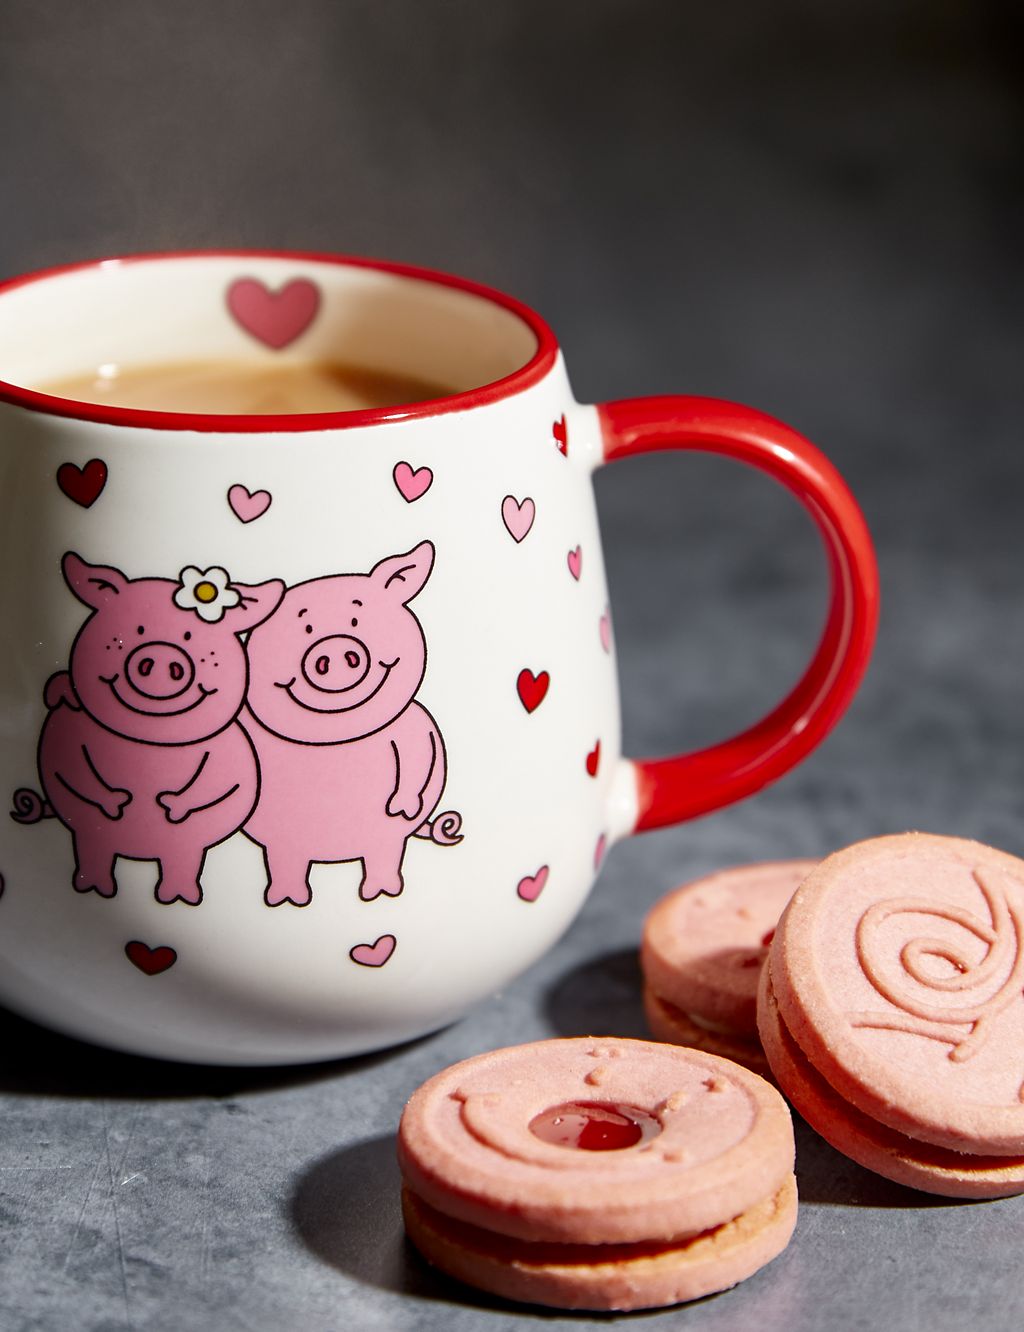 Percy Pig™ Cosy Night In Gift Bag 1 of 3